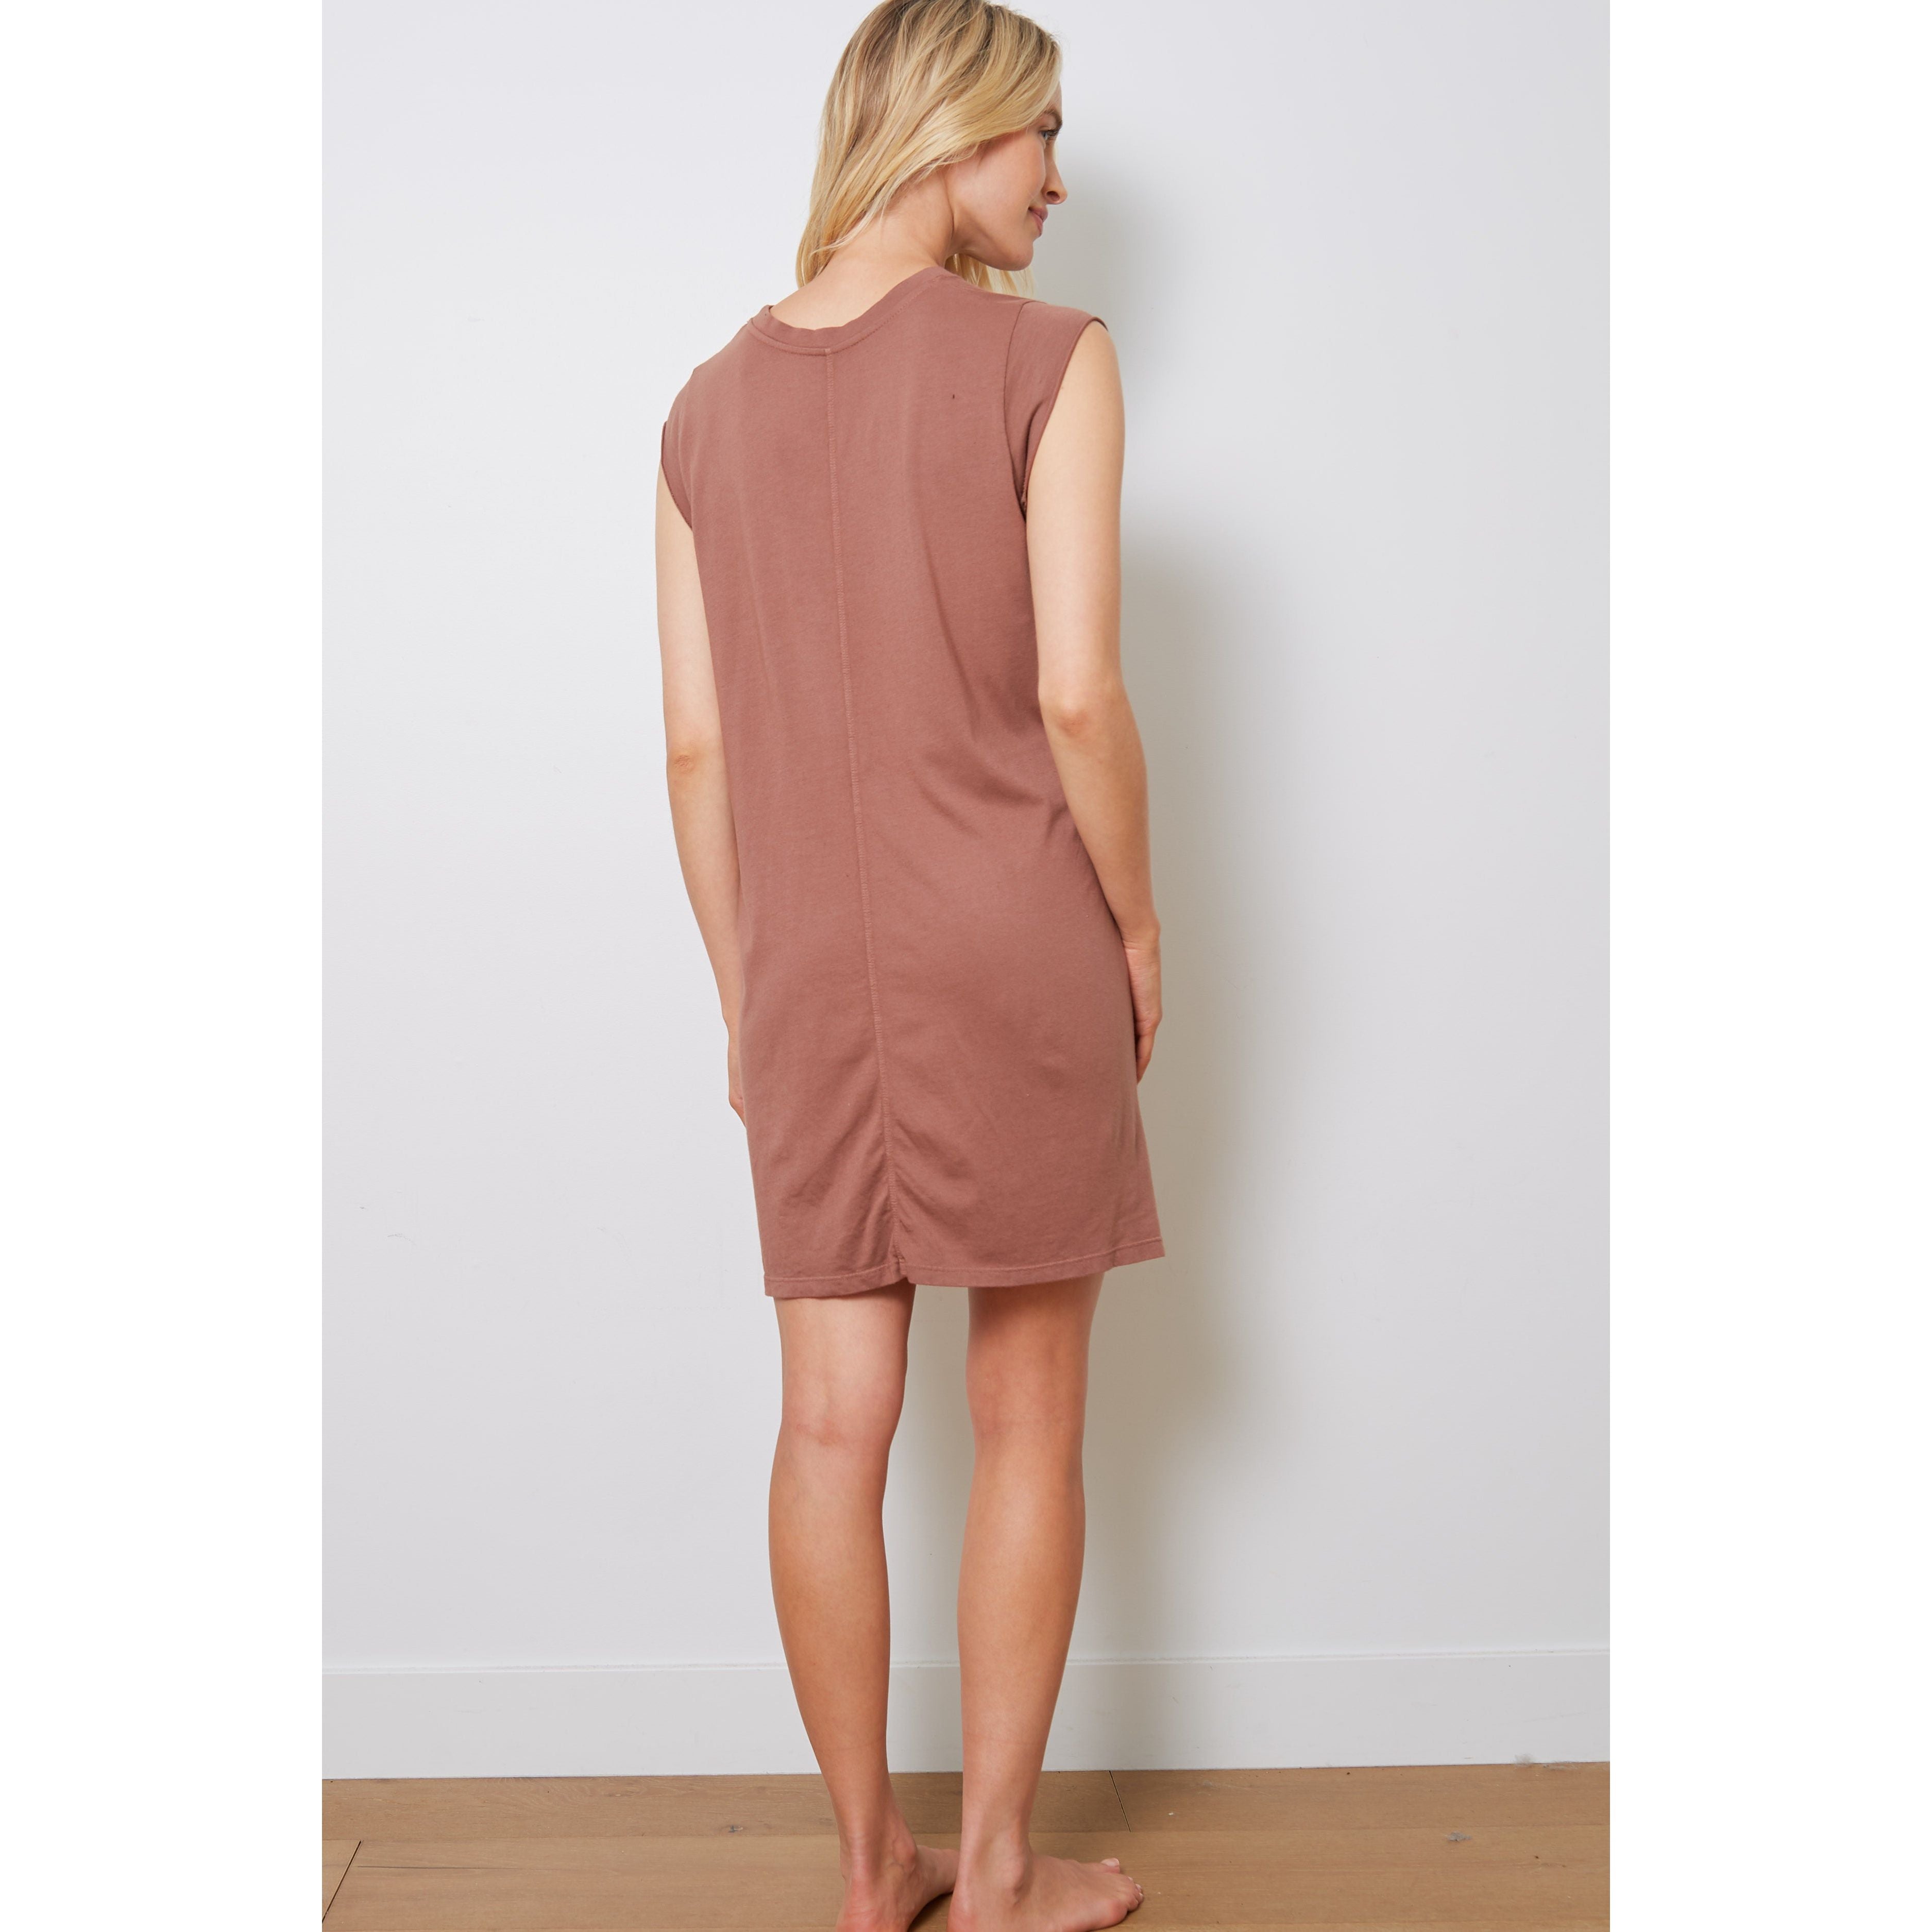 Good Hyouman - Love is the Answer Lani Dress in Coconut Shell